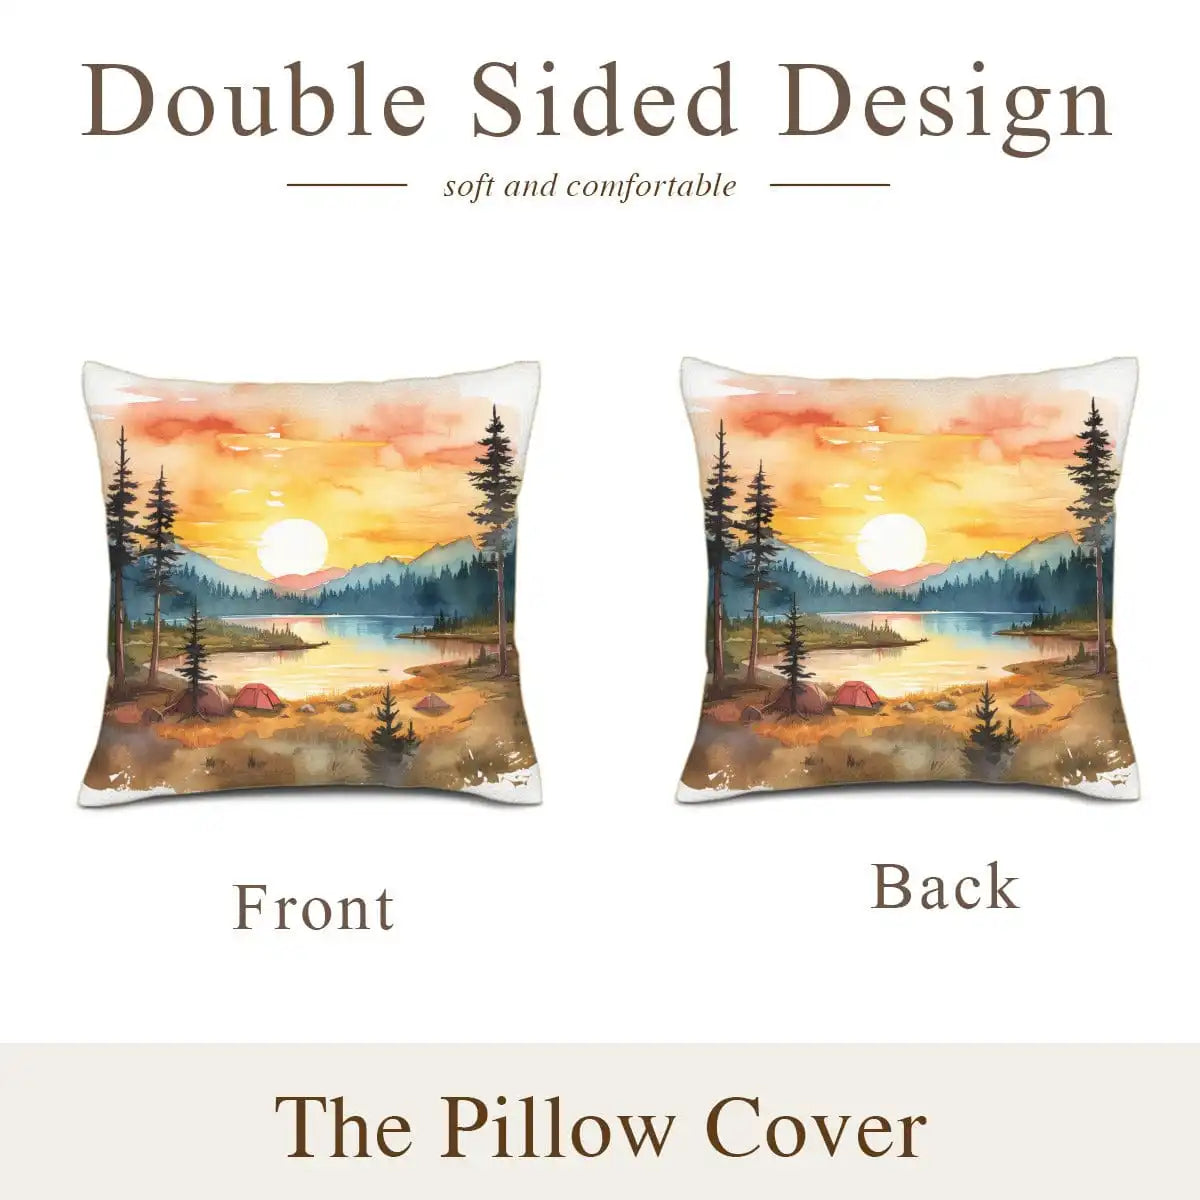 Double sided design High Quality Pillow Cover